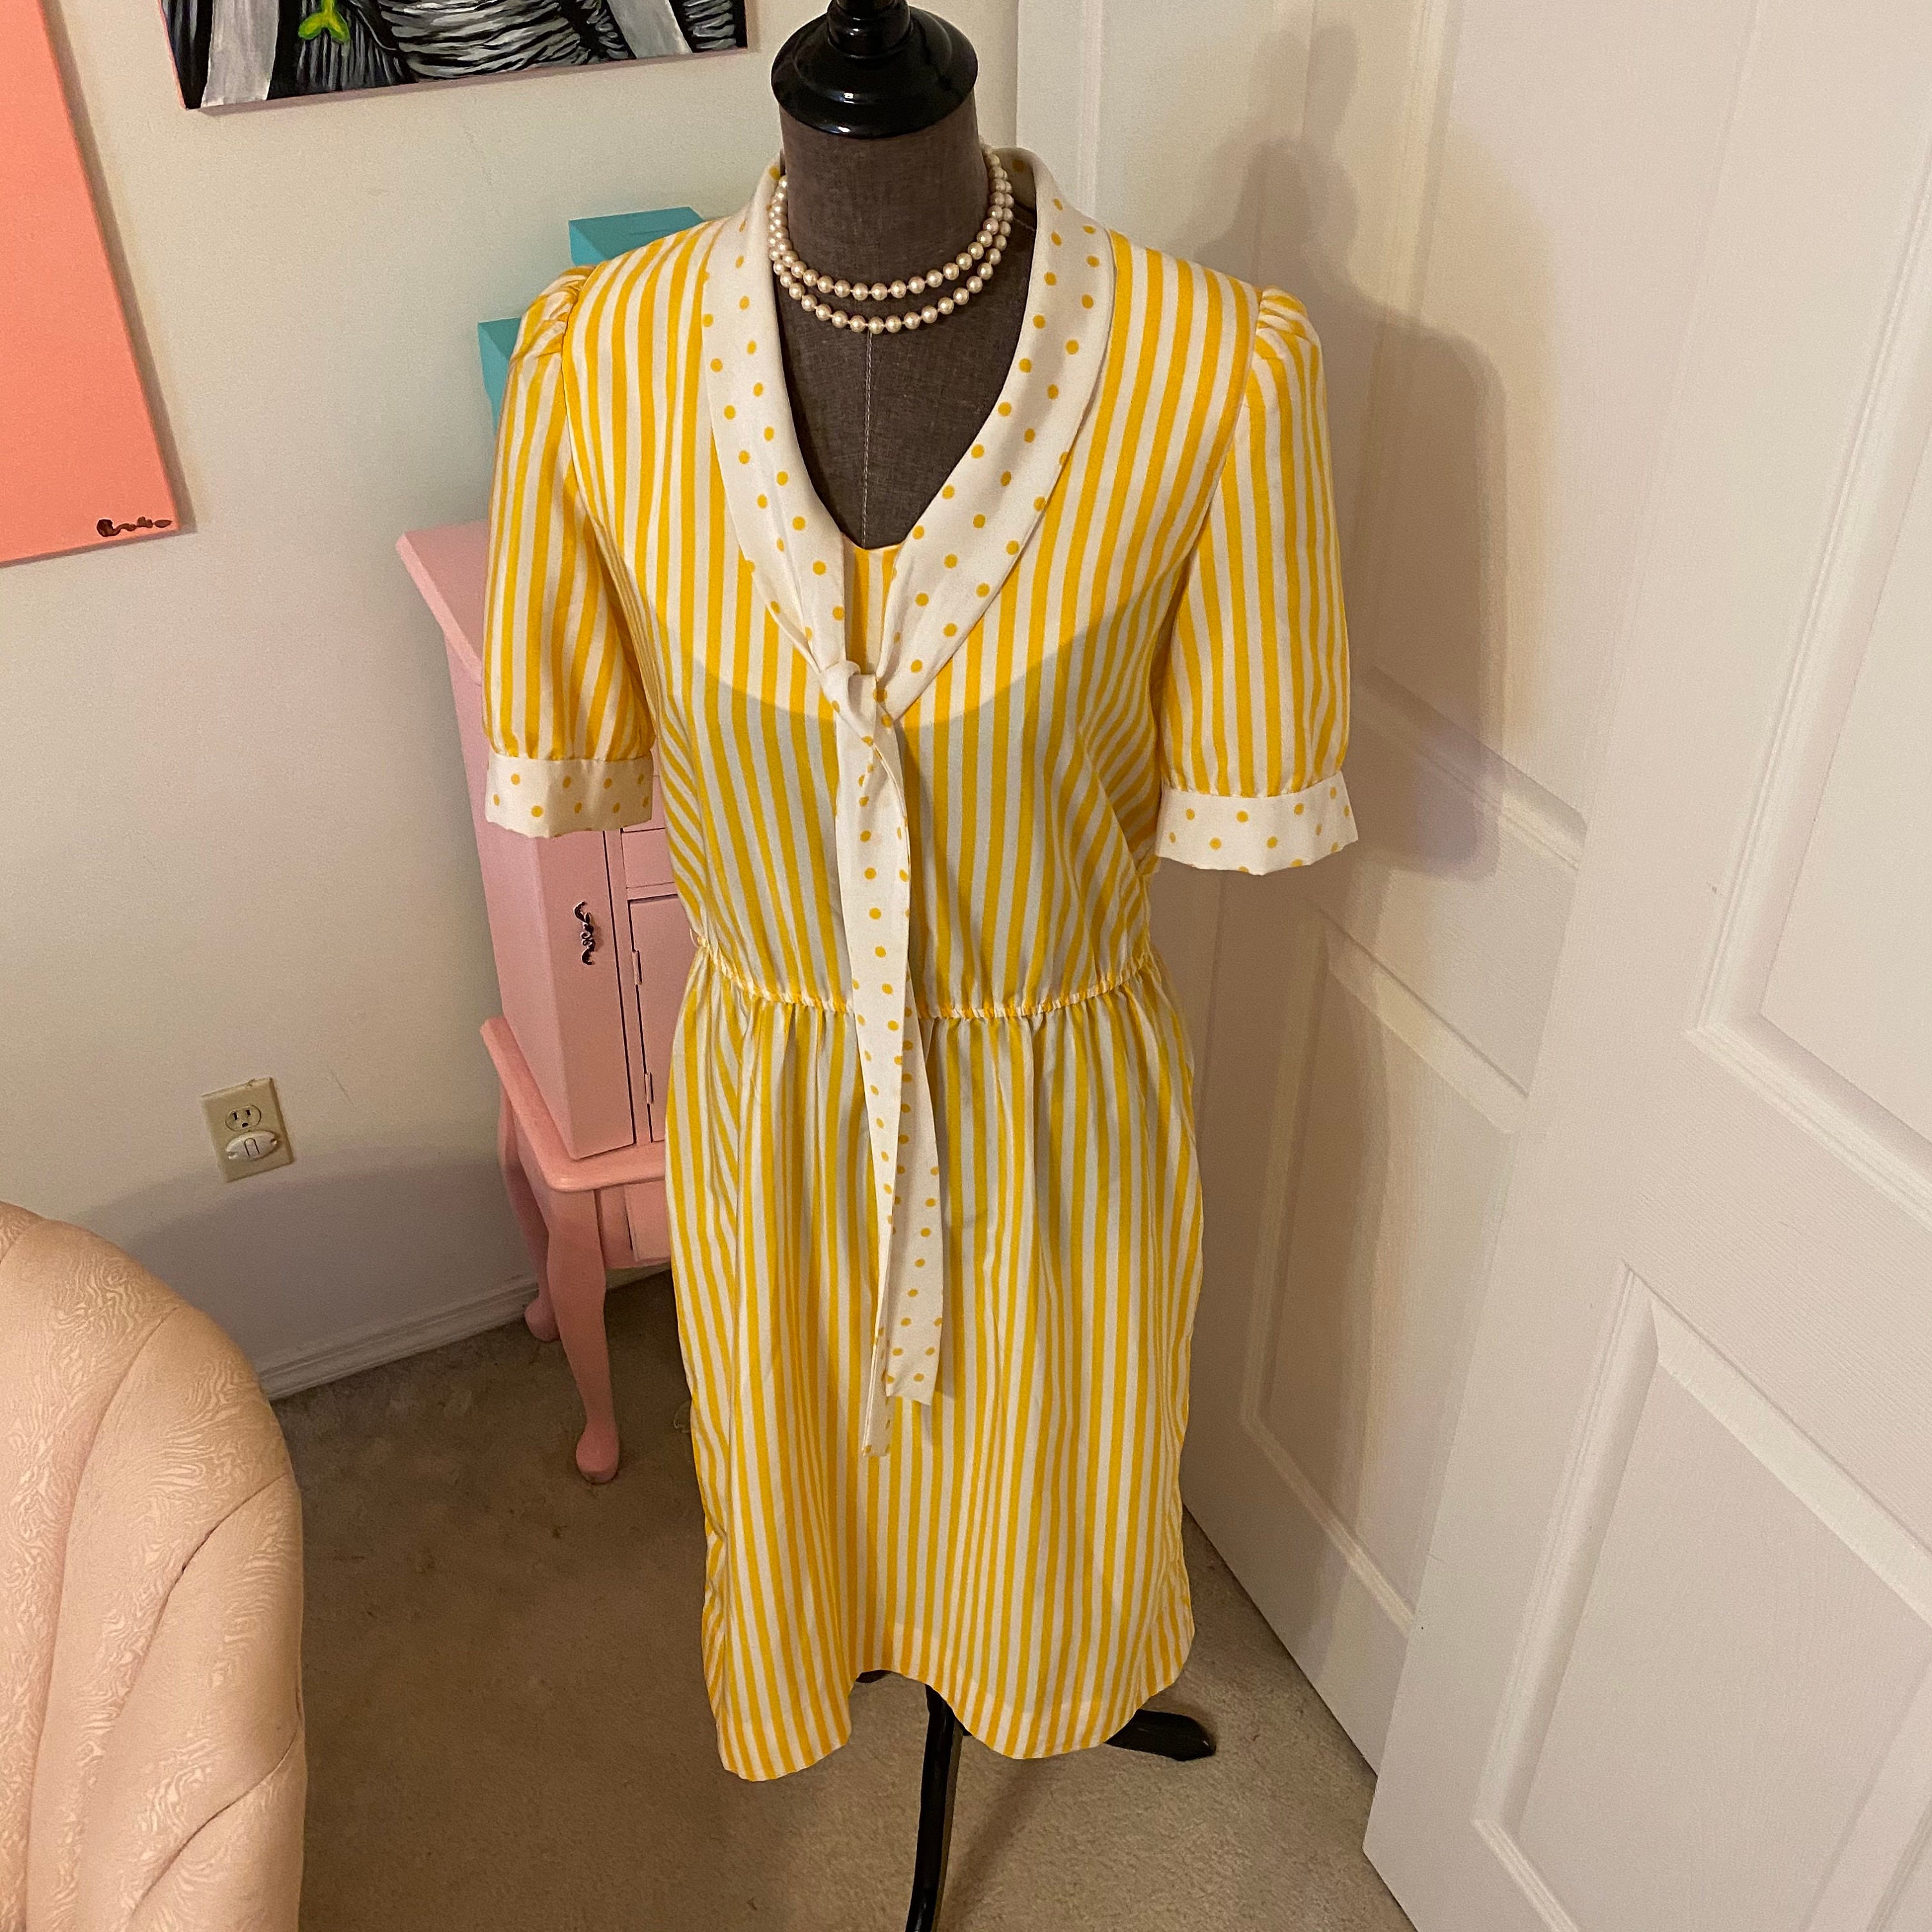 Vintage yellow and white dress by Kappi | Etsy